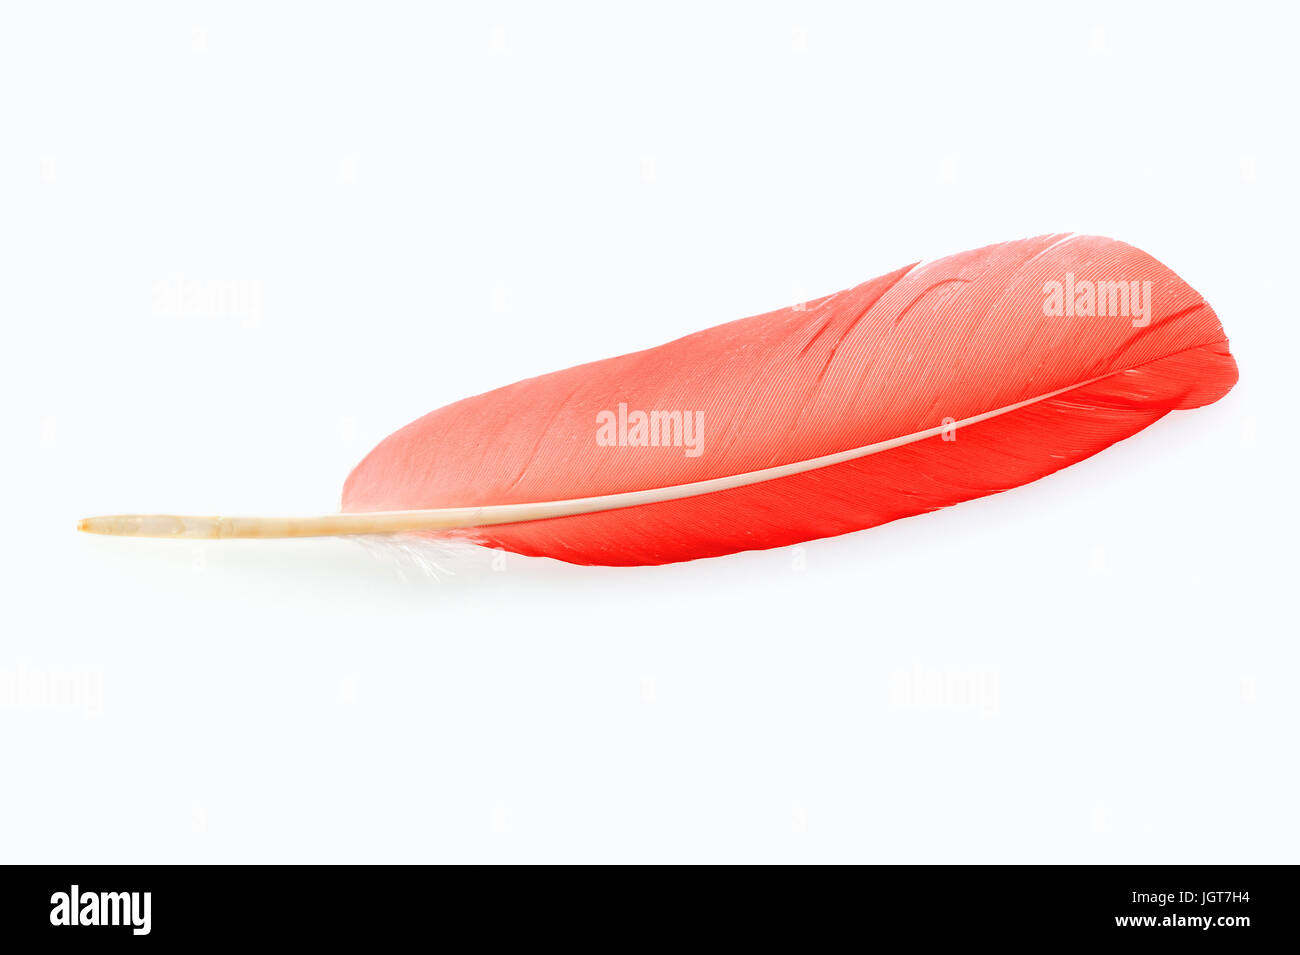 Scarlet Ibis, feather / (Eudocimus ruber) | Roter Sichler, Feder / (Eudocimus ruber) / Scharlachsichler Stock Photo